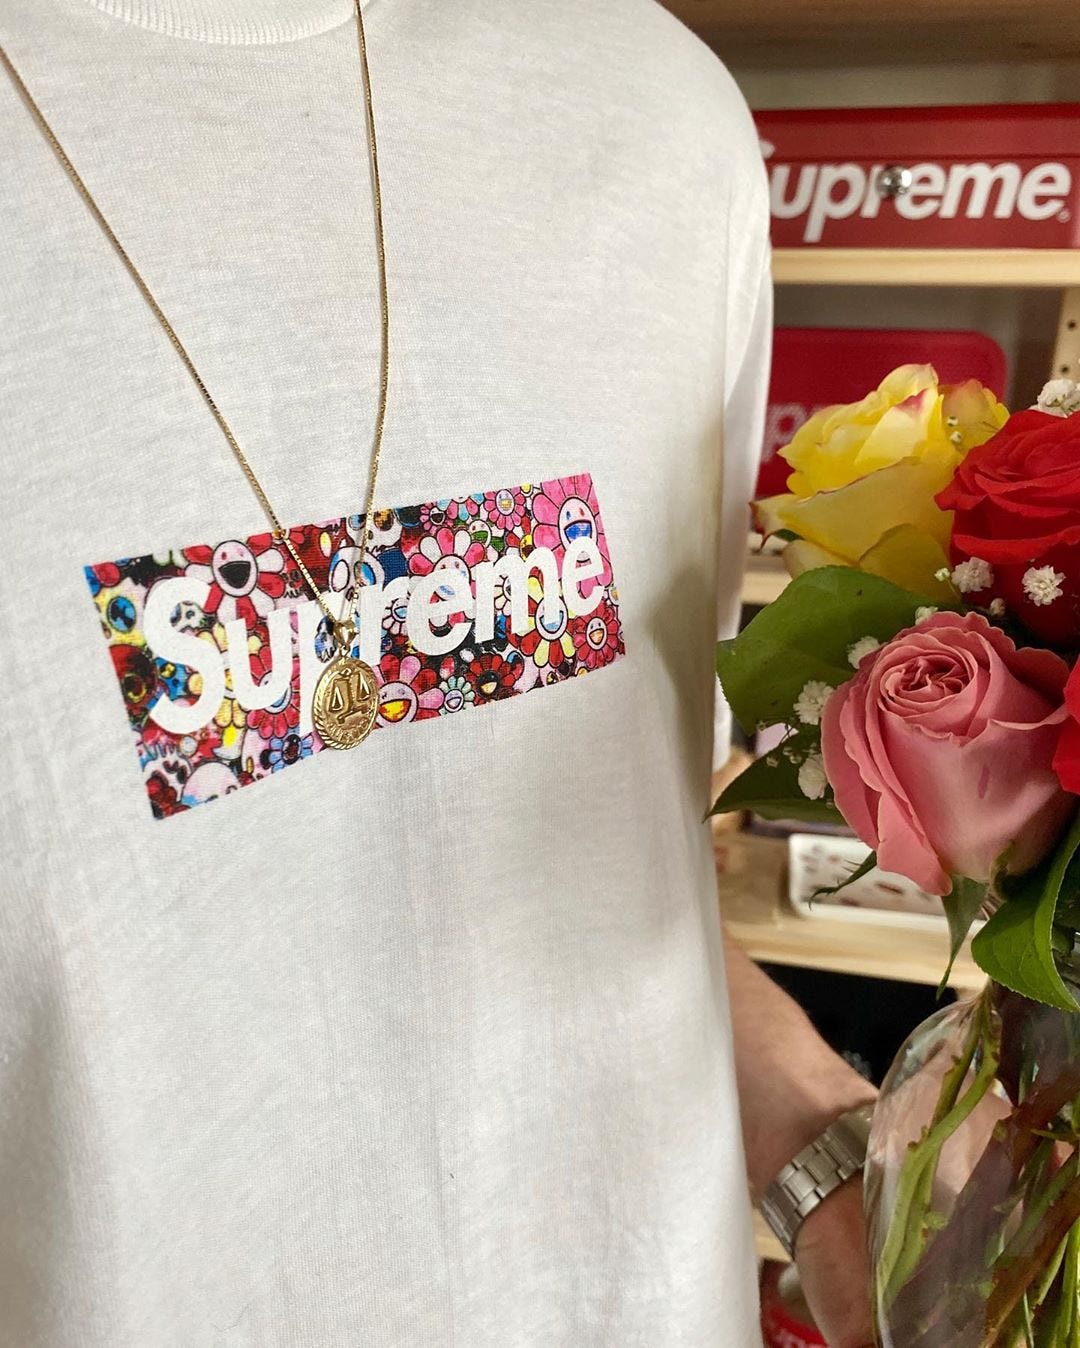 How Supreme Built a Billion-Dollar Brand With Zero Paid Advertising, by  Thakur Rahul Singh